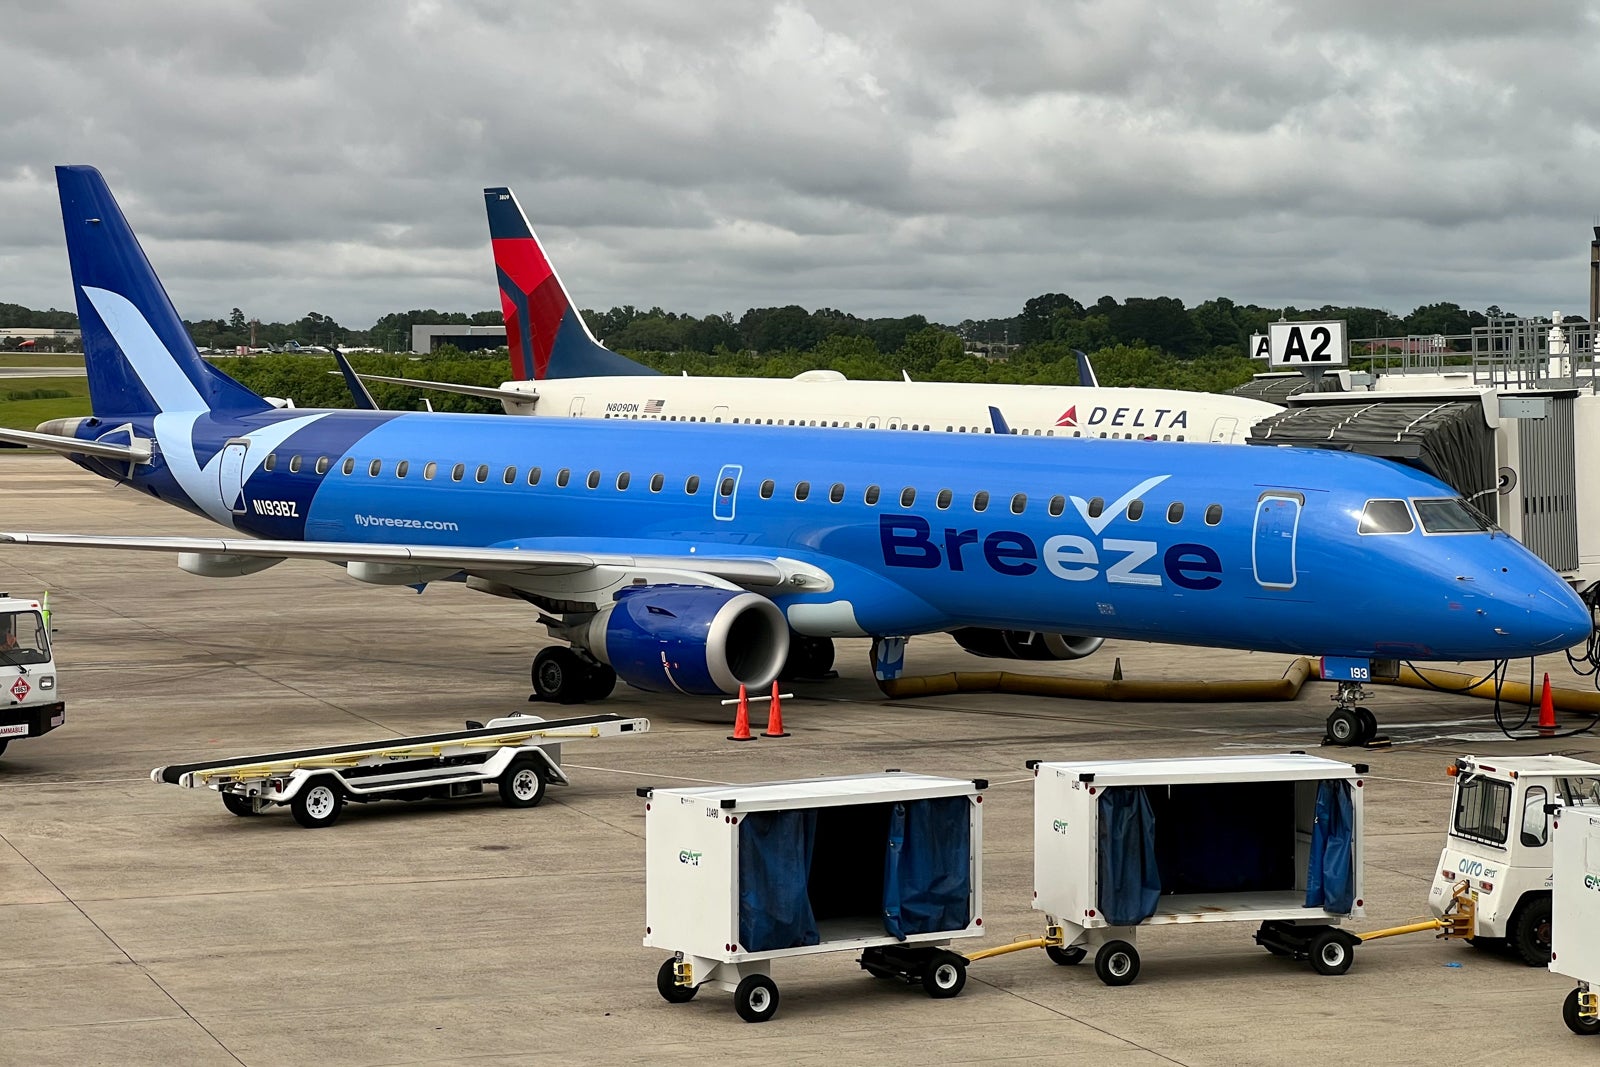 Breeze deal: Fly to multiple US cities for as little as $58 round-trip